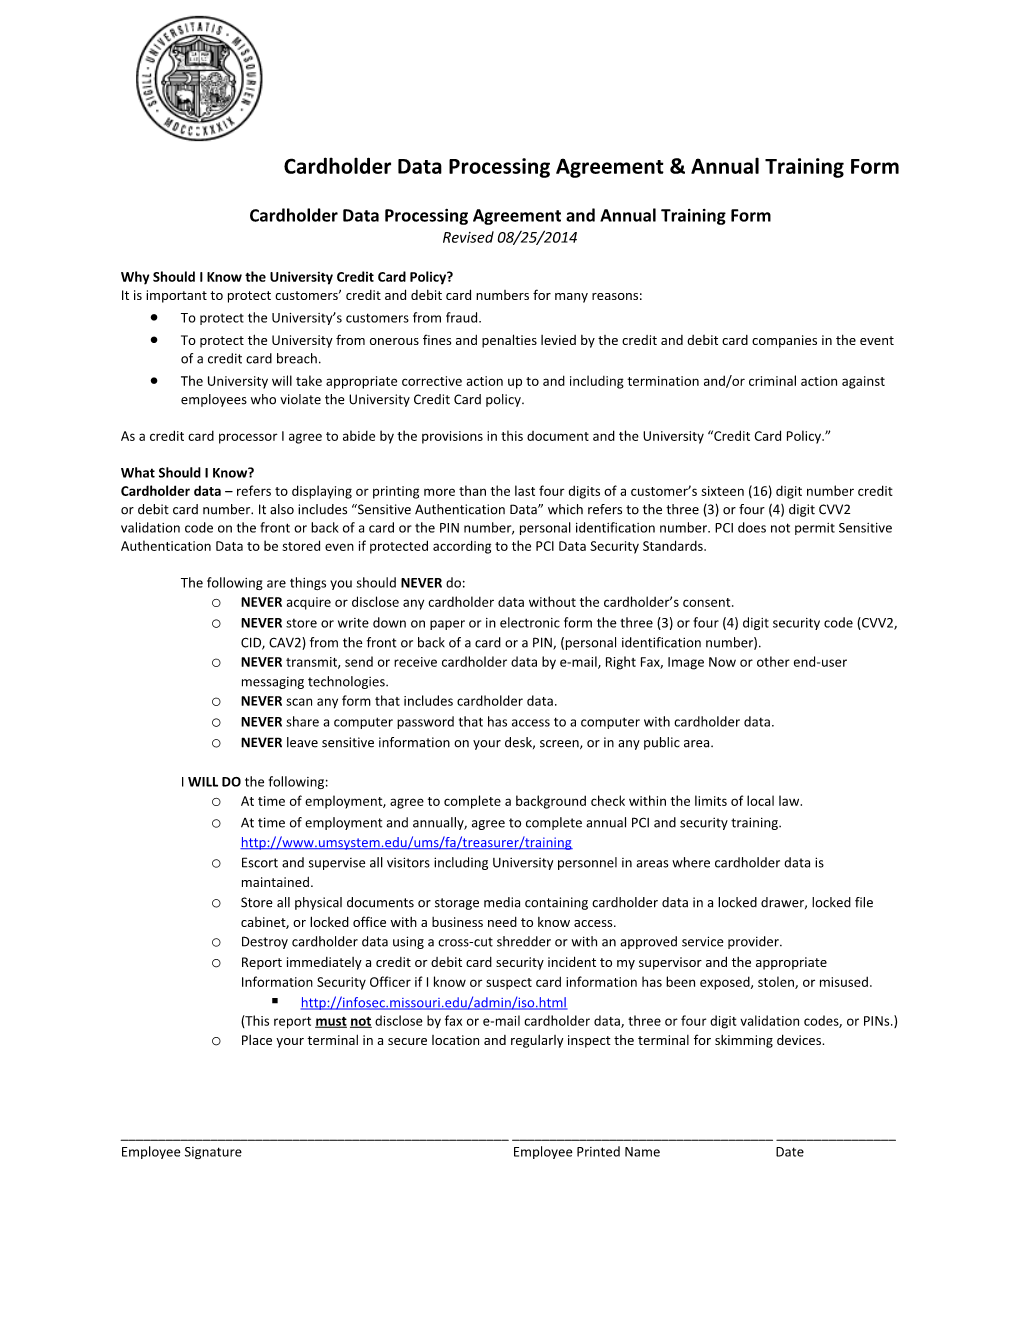 Cardholder Data Processing Agreement and Annual Training Form